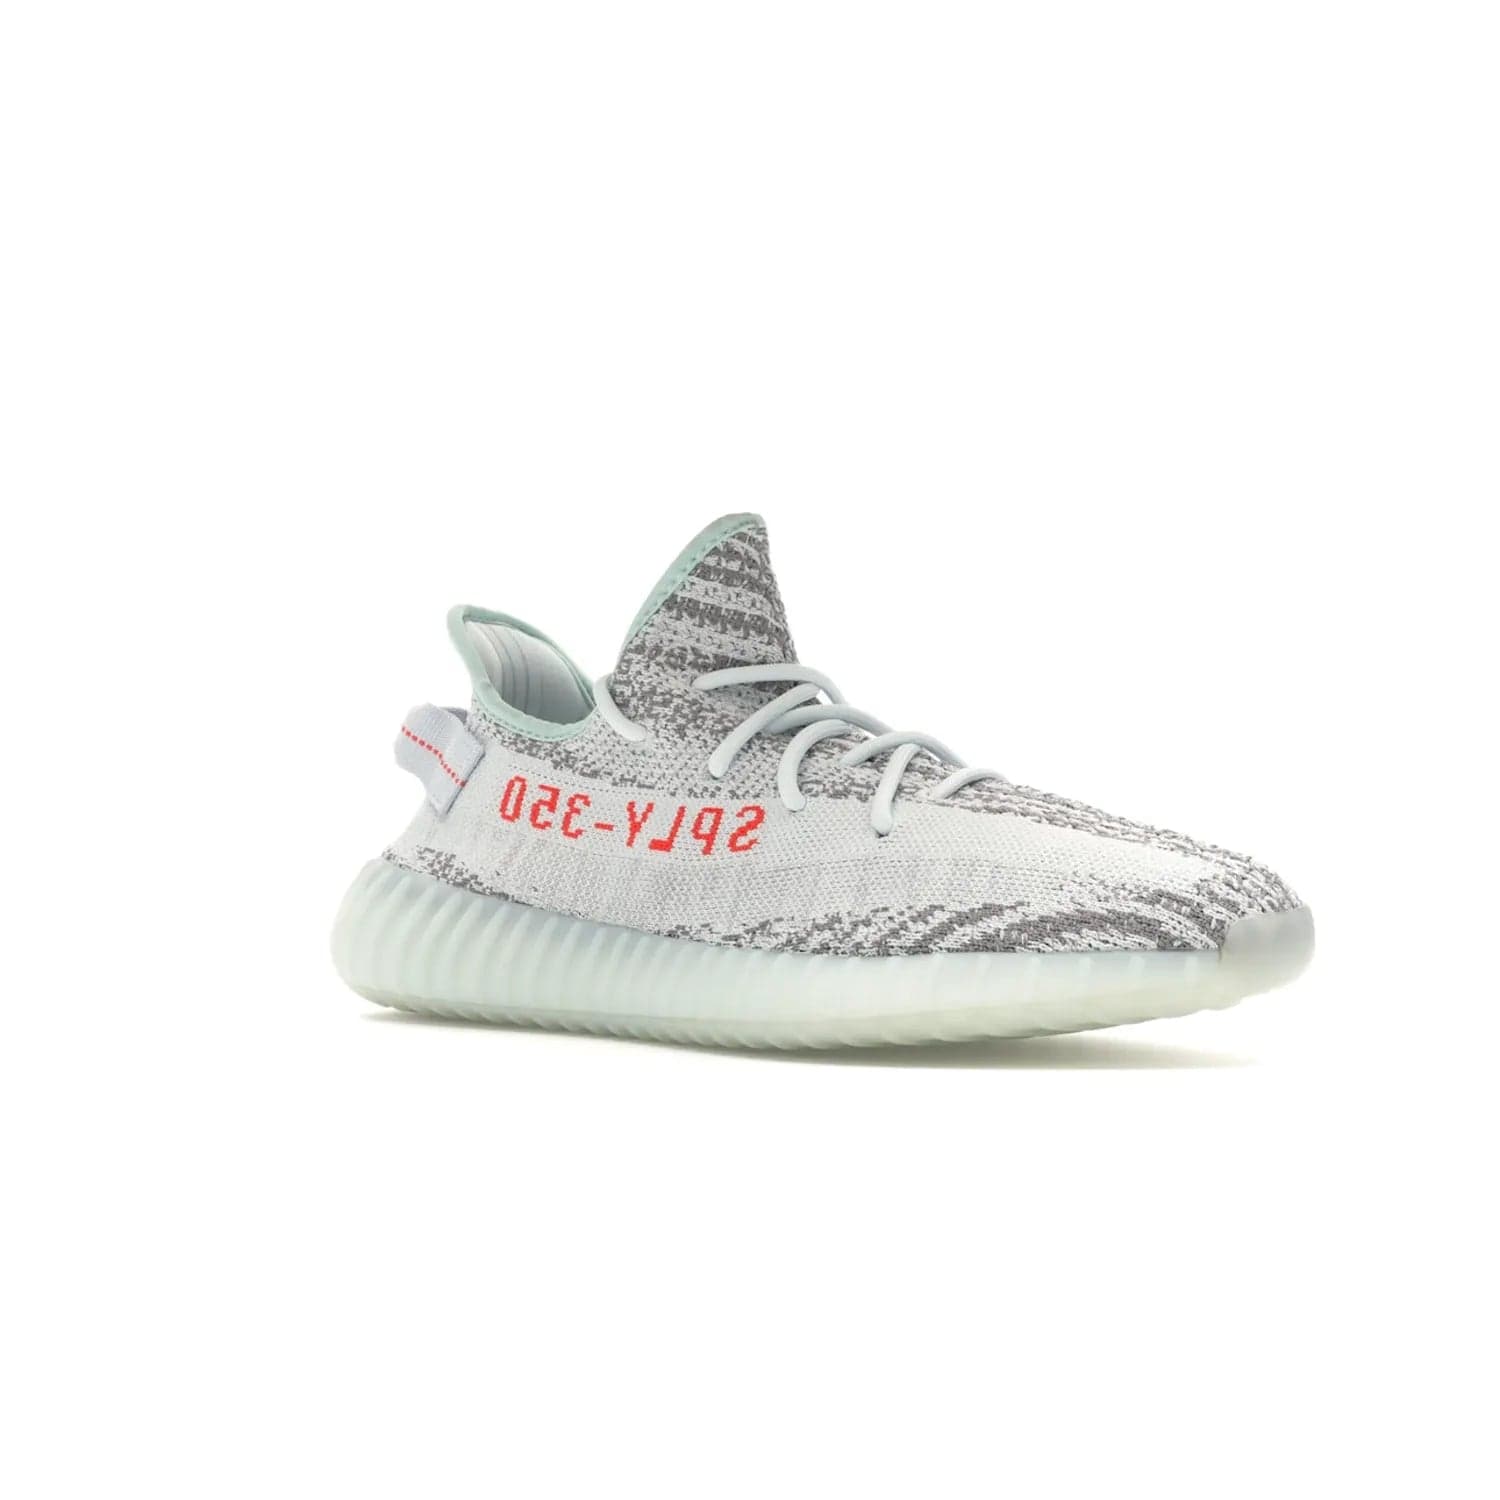 adidas Yeezy Boost 350 V2 Blue Tint - Image 5 - Only at www.BallersClubKickz.com - The adidas Yeezy Boost 350 V2 Blue Tint merges fashion and functionality with its Primeknit upper and Boost sole. Released in December 2017, this luxurious sneaker is perfect for making a stylish statement.